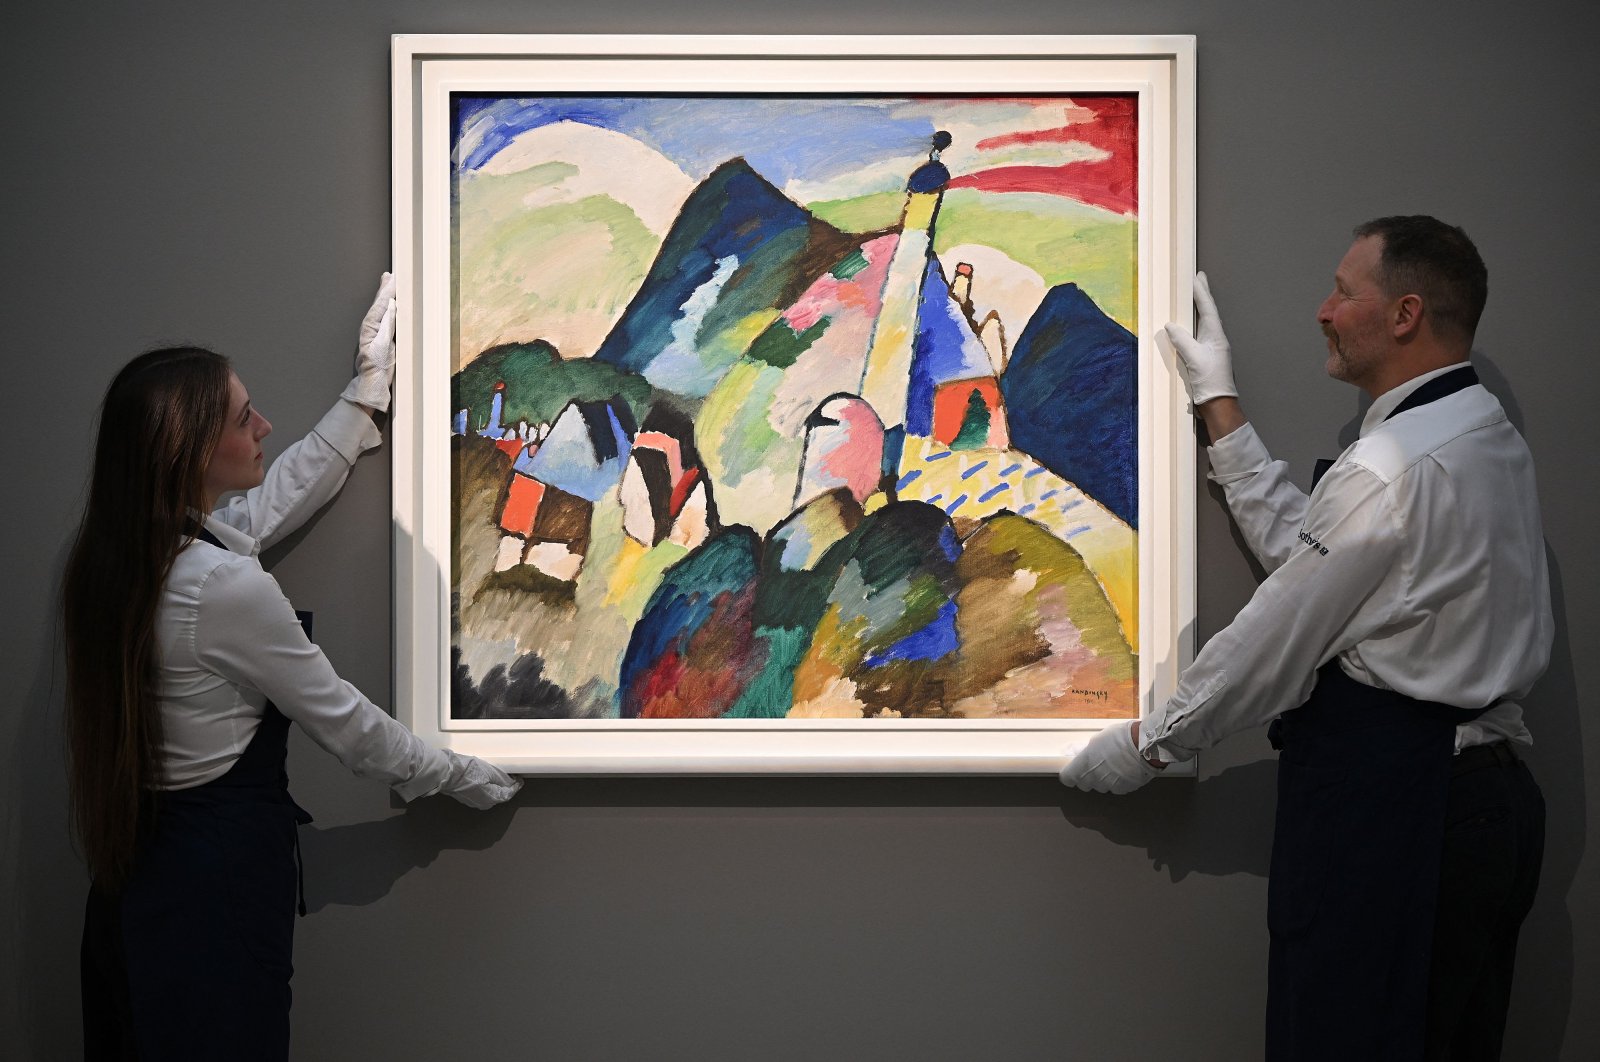 Employees poses with an artwork entitled &#039;Murnau mi Kirche II&#039; (Murnau with Church II) by Wassily Kandinsky, during a photocall at Sotheby&#039;s auction house in central London, U.K., Feb. 22, 2023. (AFP Photo) 